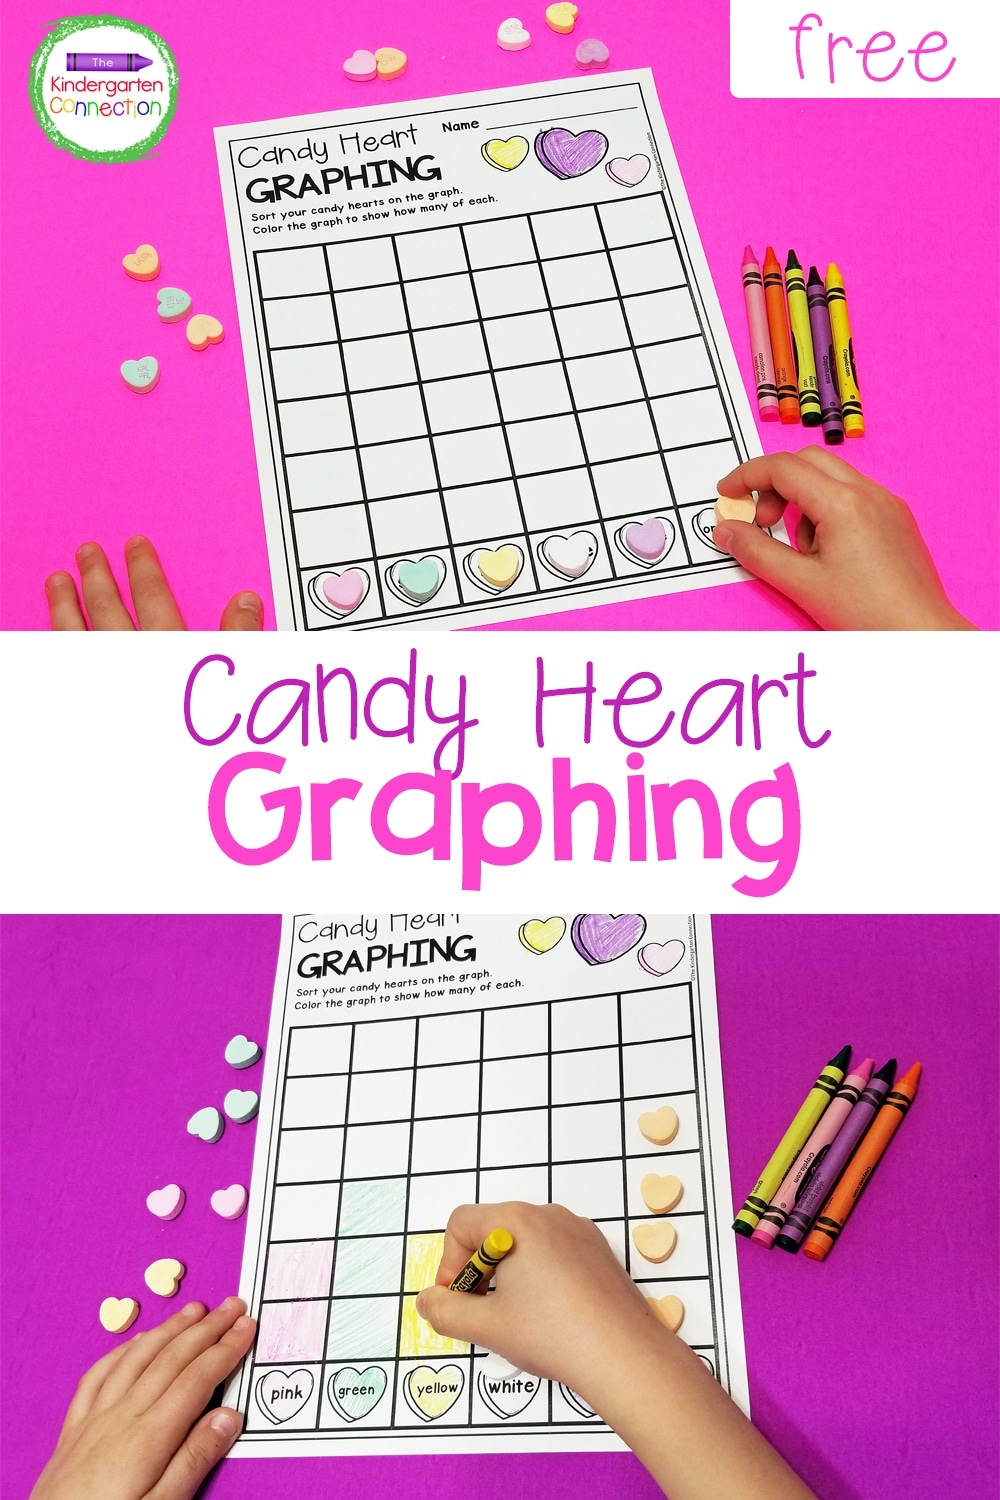 FREE Candy Heart Graphing Printable The Kindergarten Connection